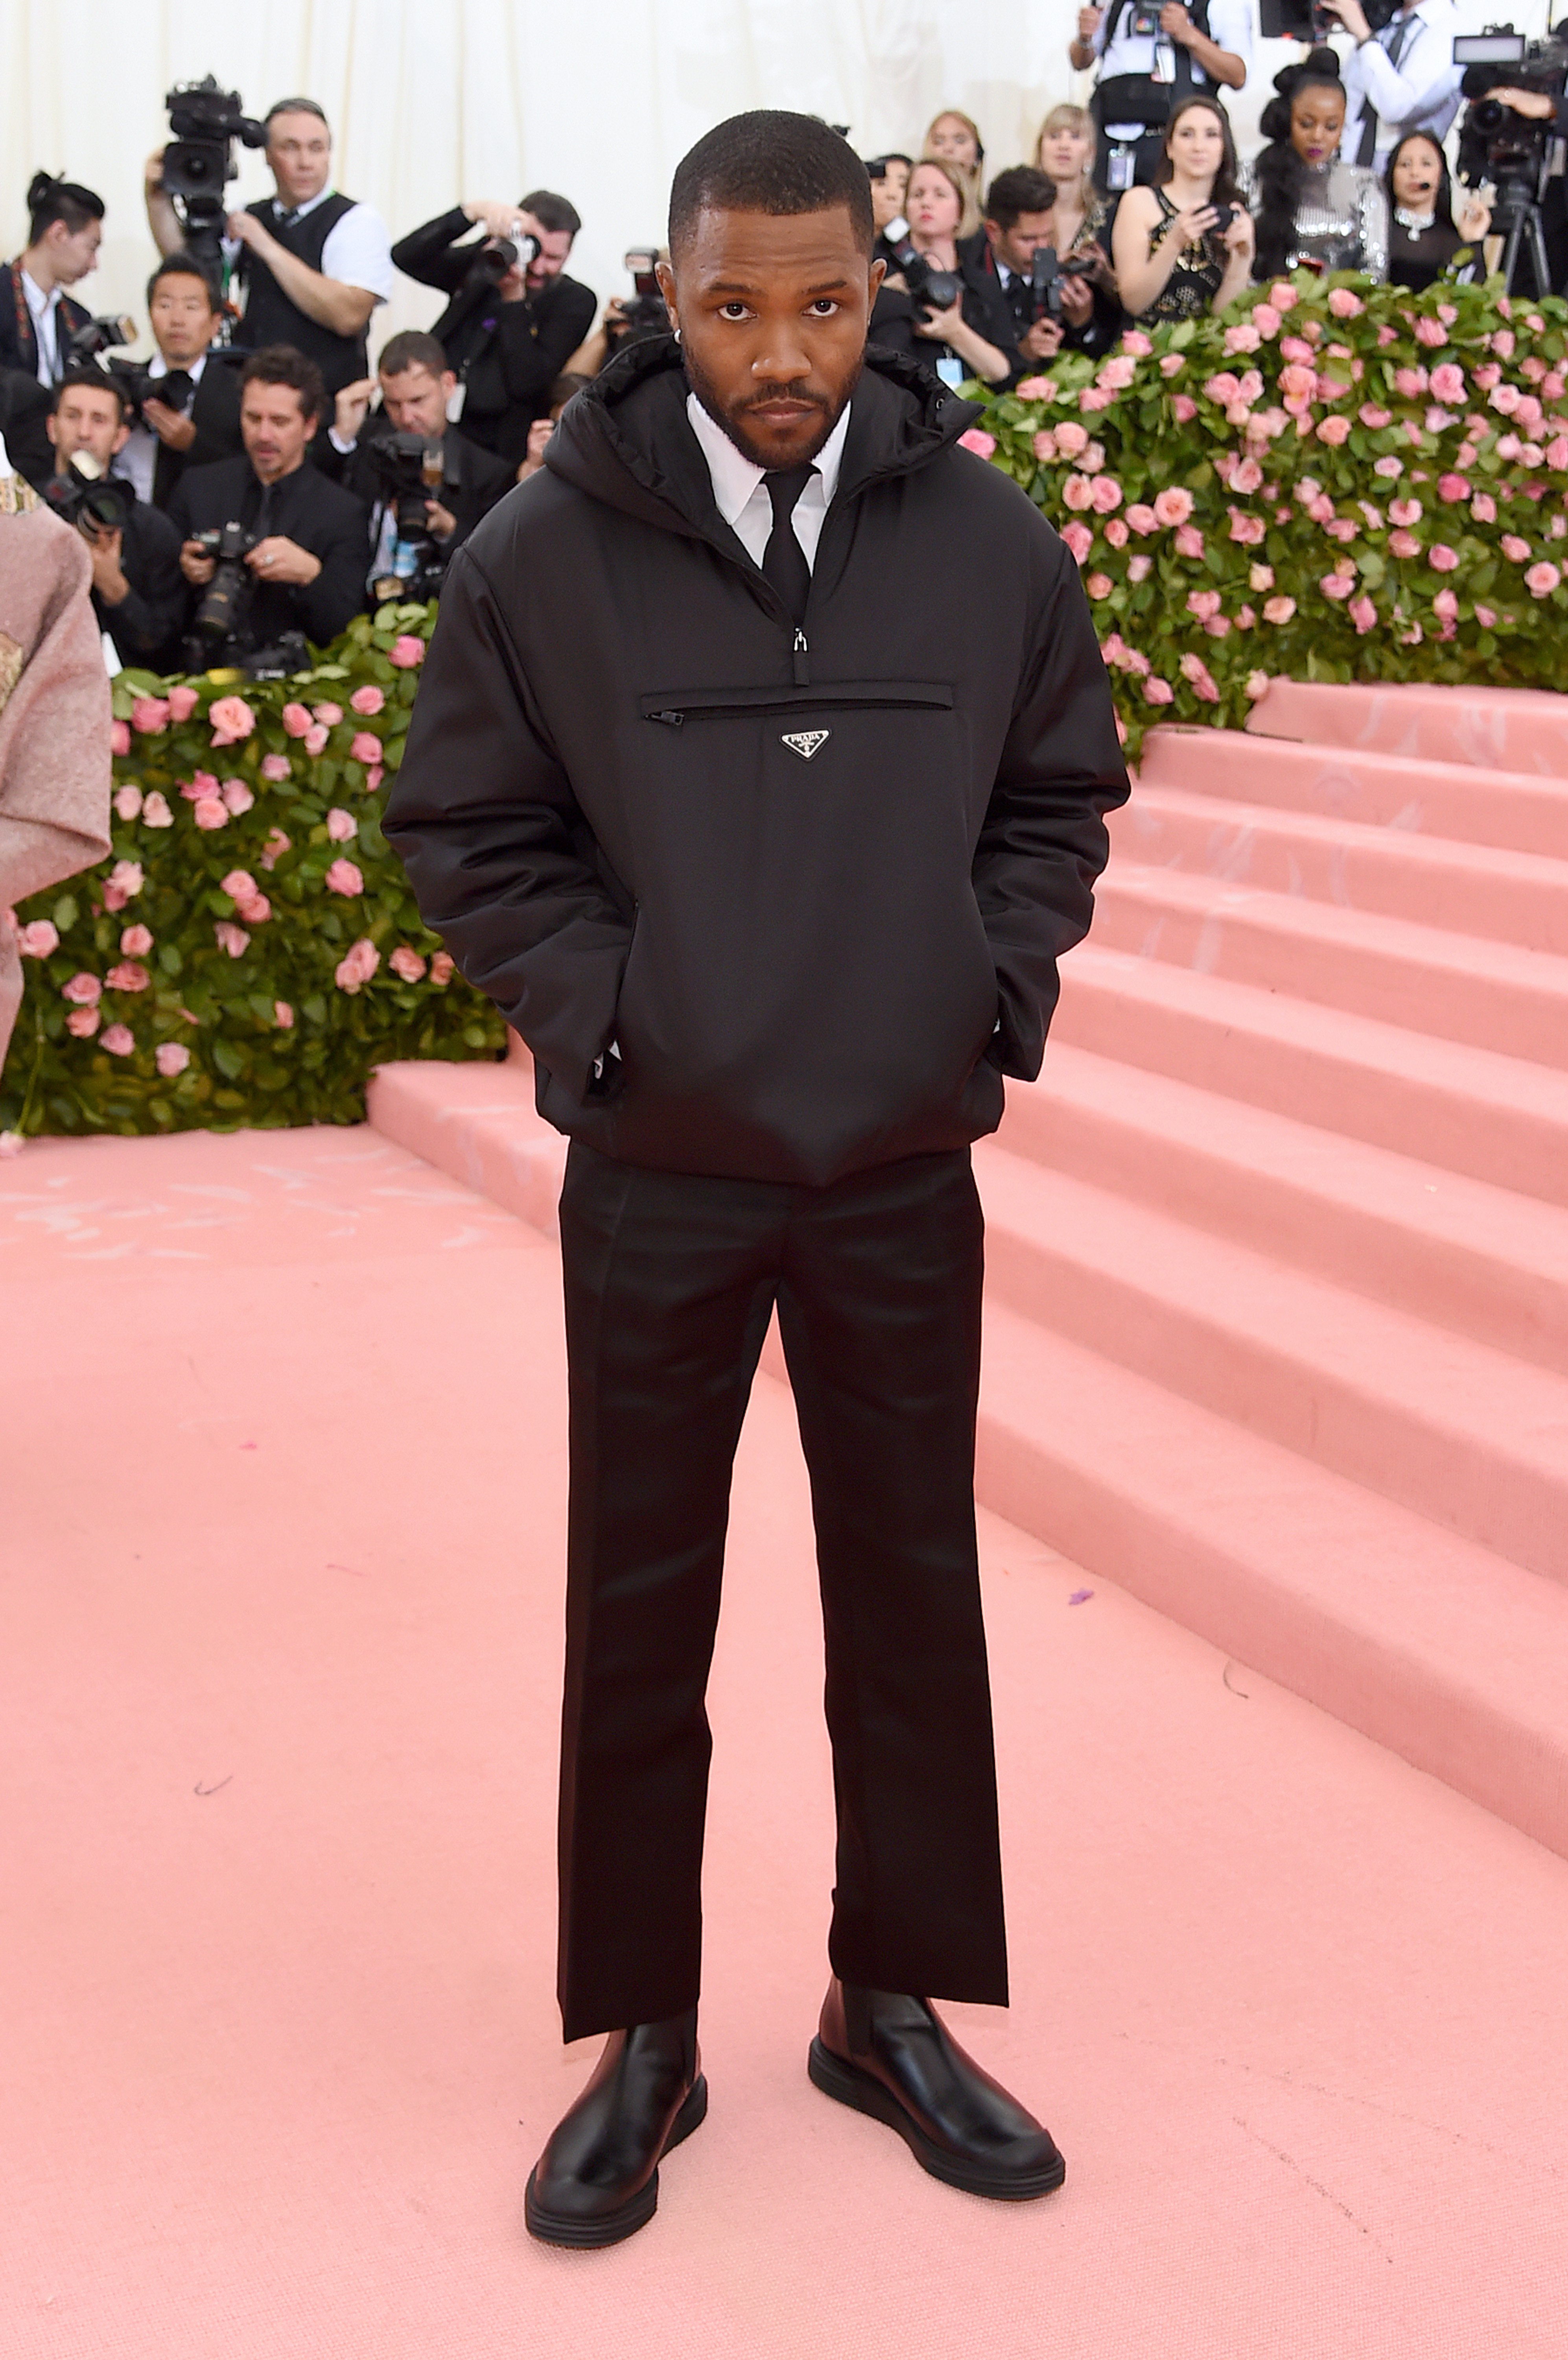 beside Want to Hate We may have cracked the code regarding Kanye West and Frank Ocean's 2019  Met Gala looks - ICON